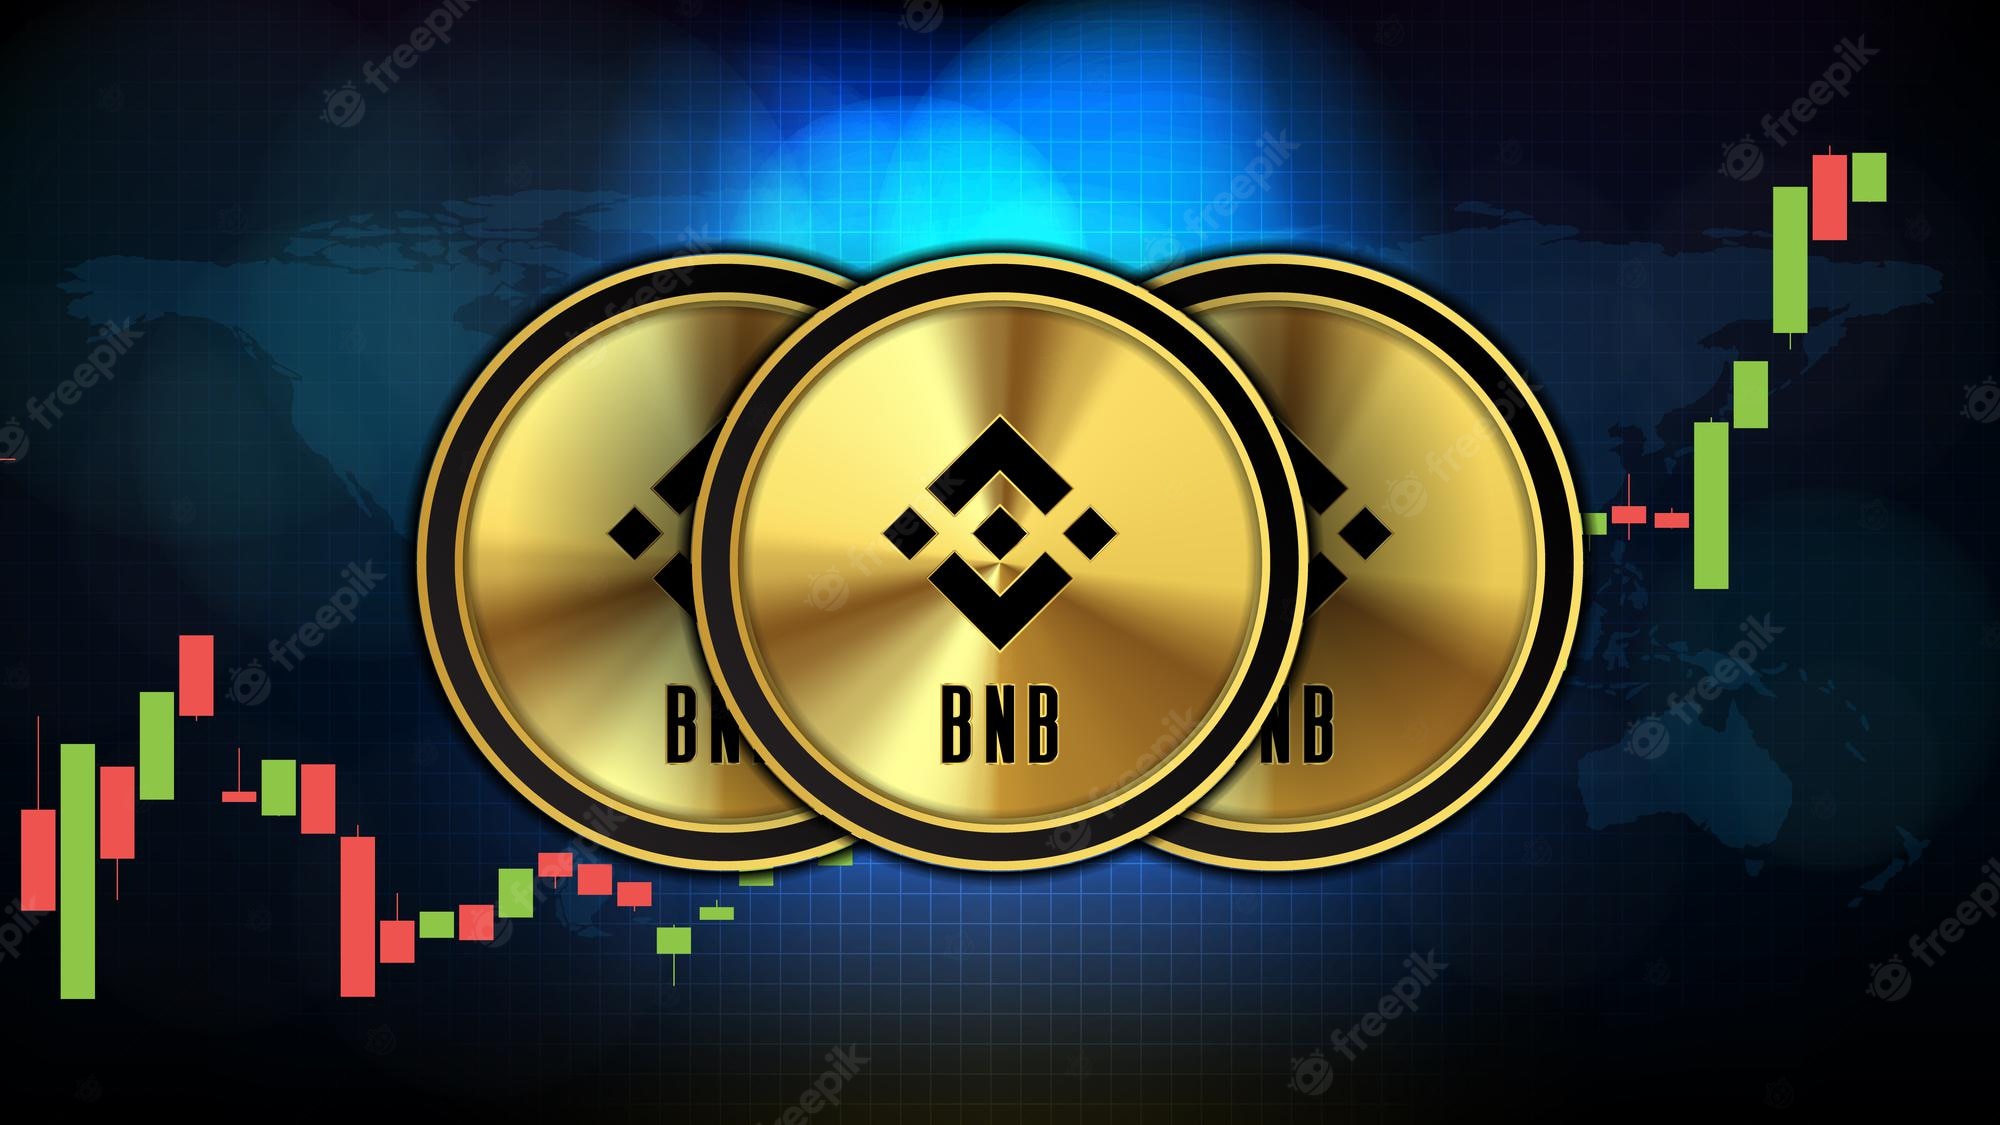 Binance Hacker Put Millions Of New BNB In Circulation, What Does This Mean For Price?